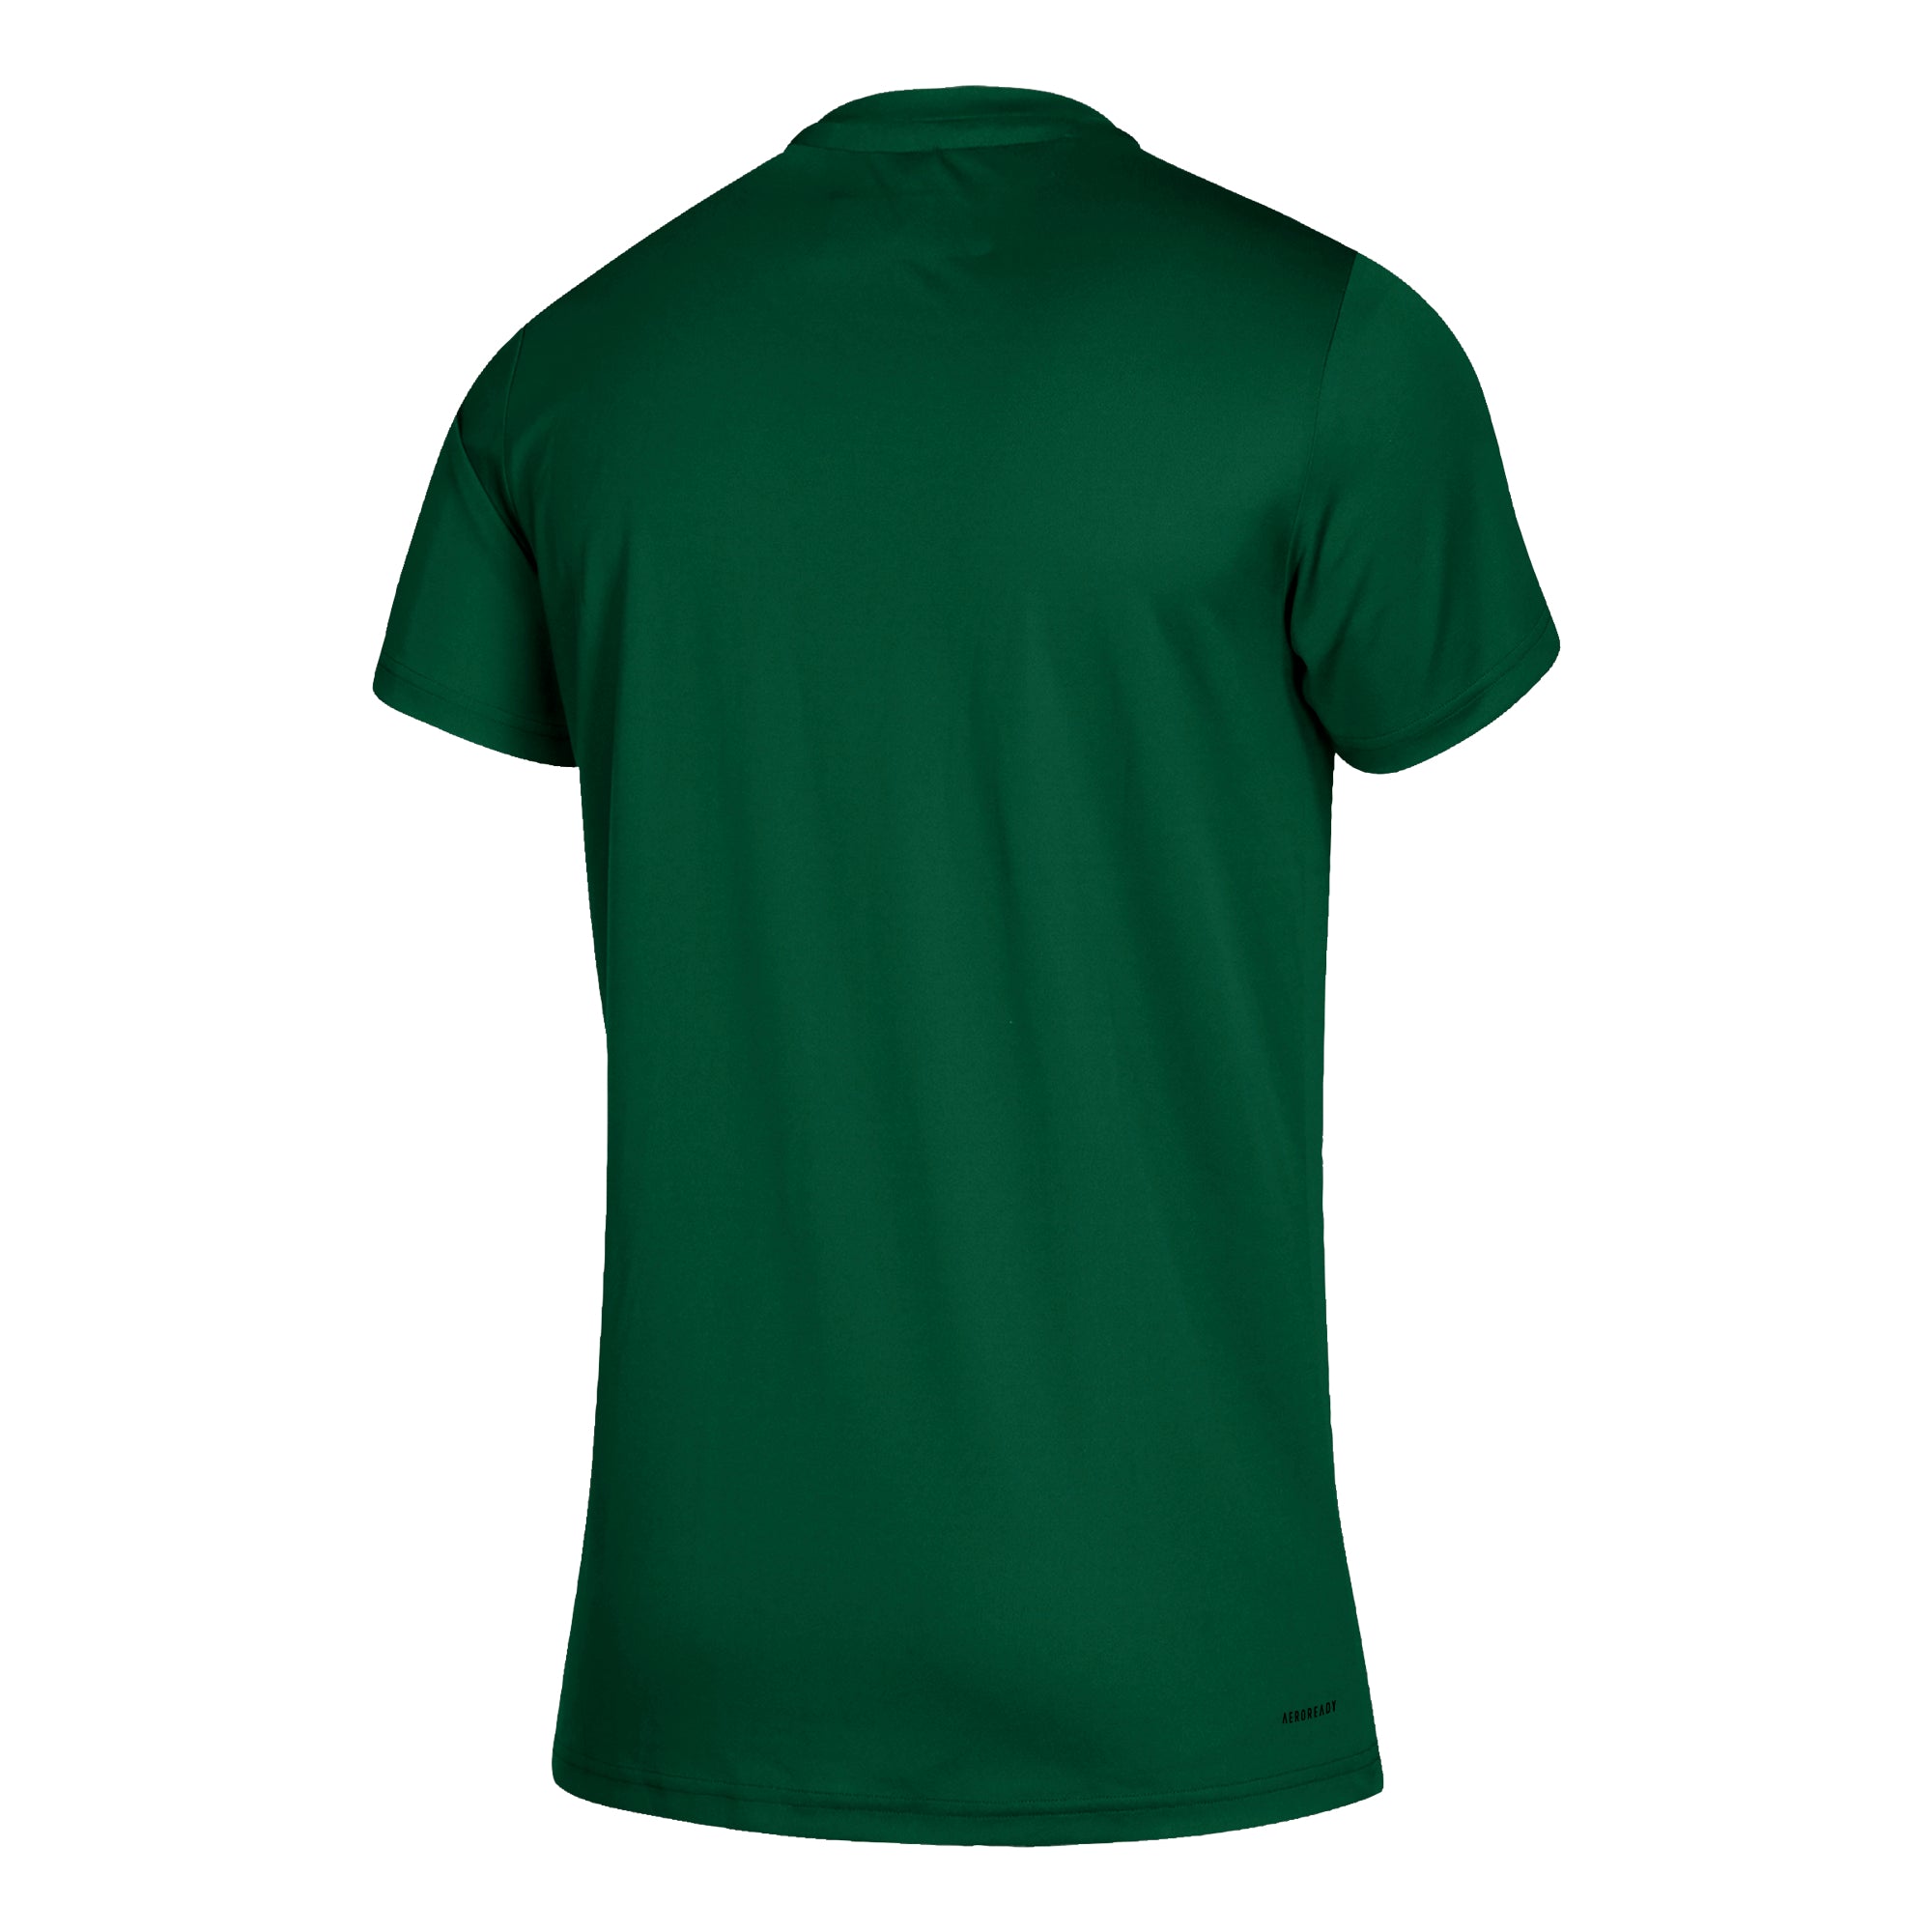 Miami Hurricanes adidas Youth Cover Story CLIMATCH S/S T-Shirt - Green